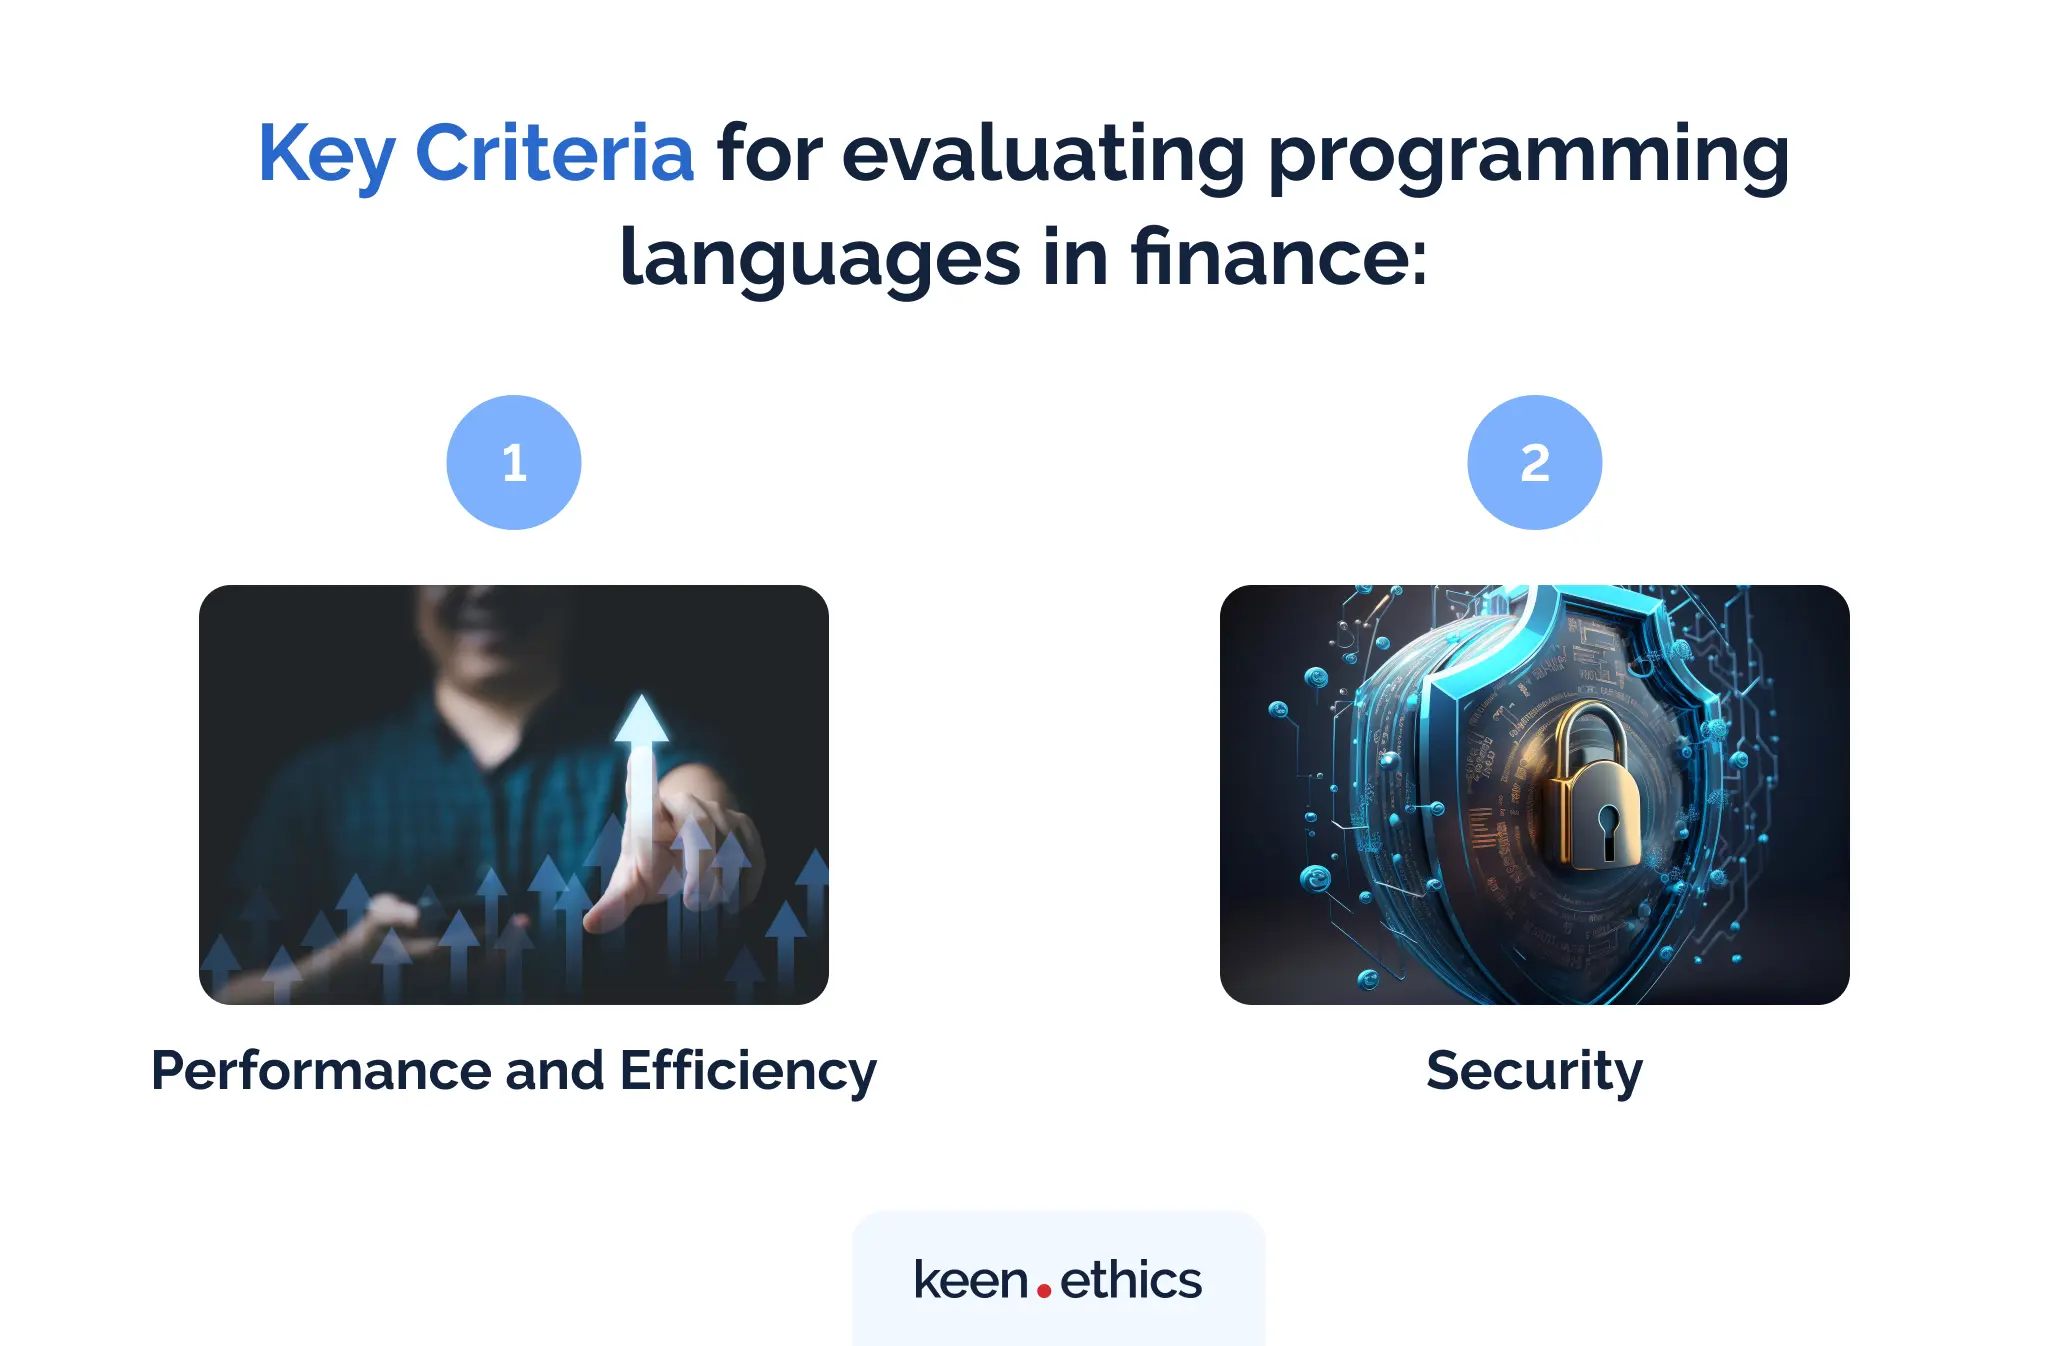 Key criteria for evaluating programming languages in finance